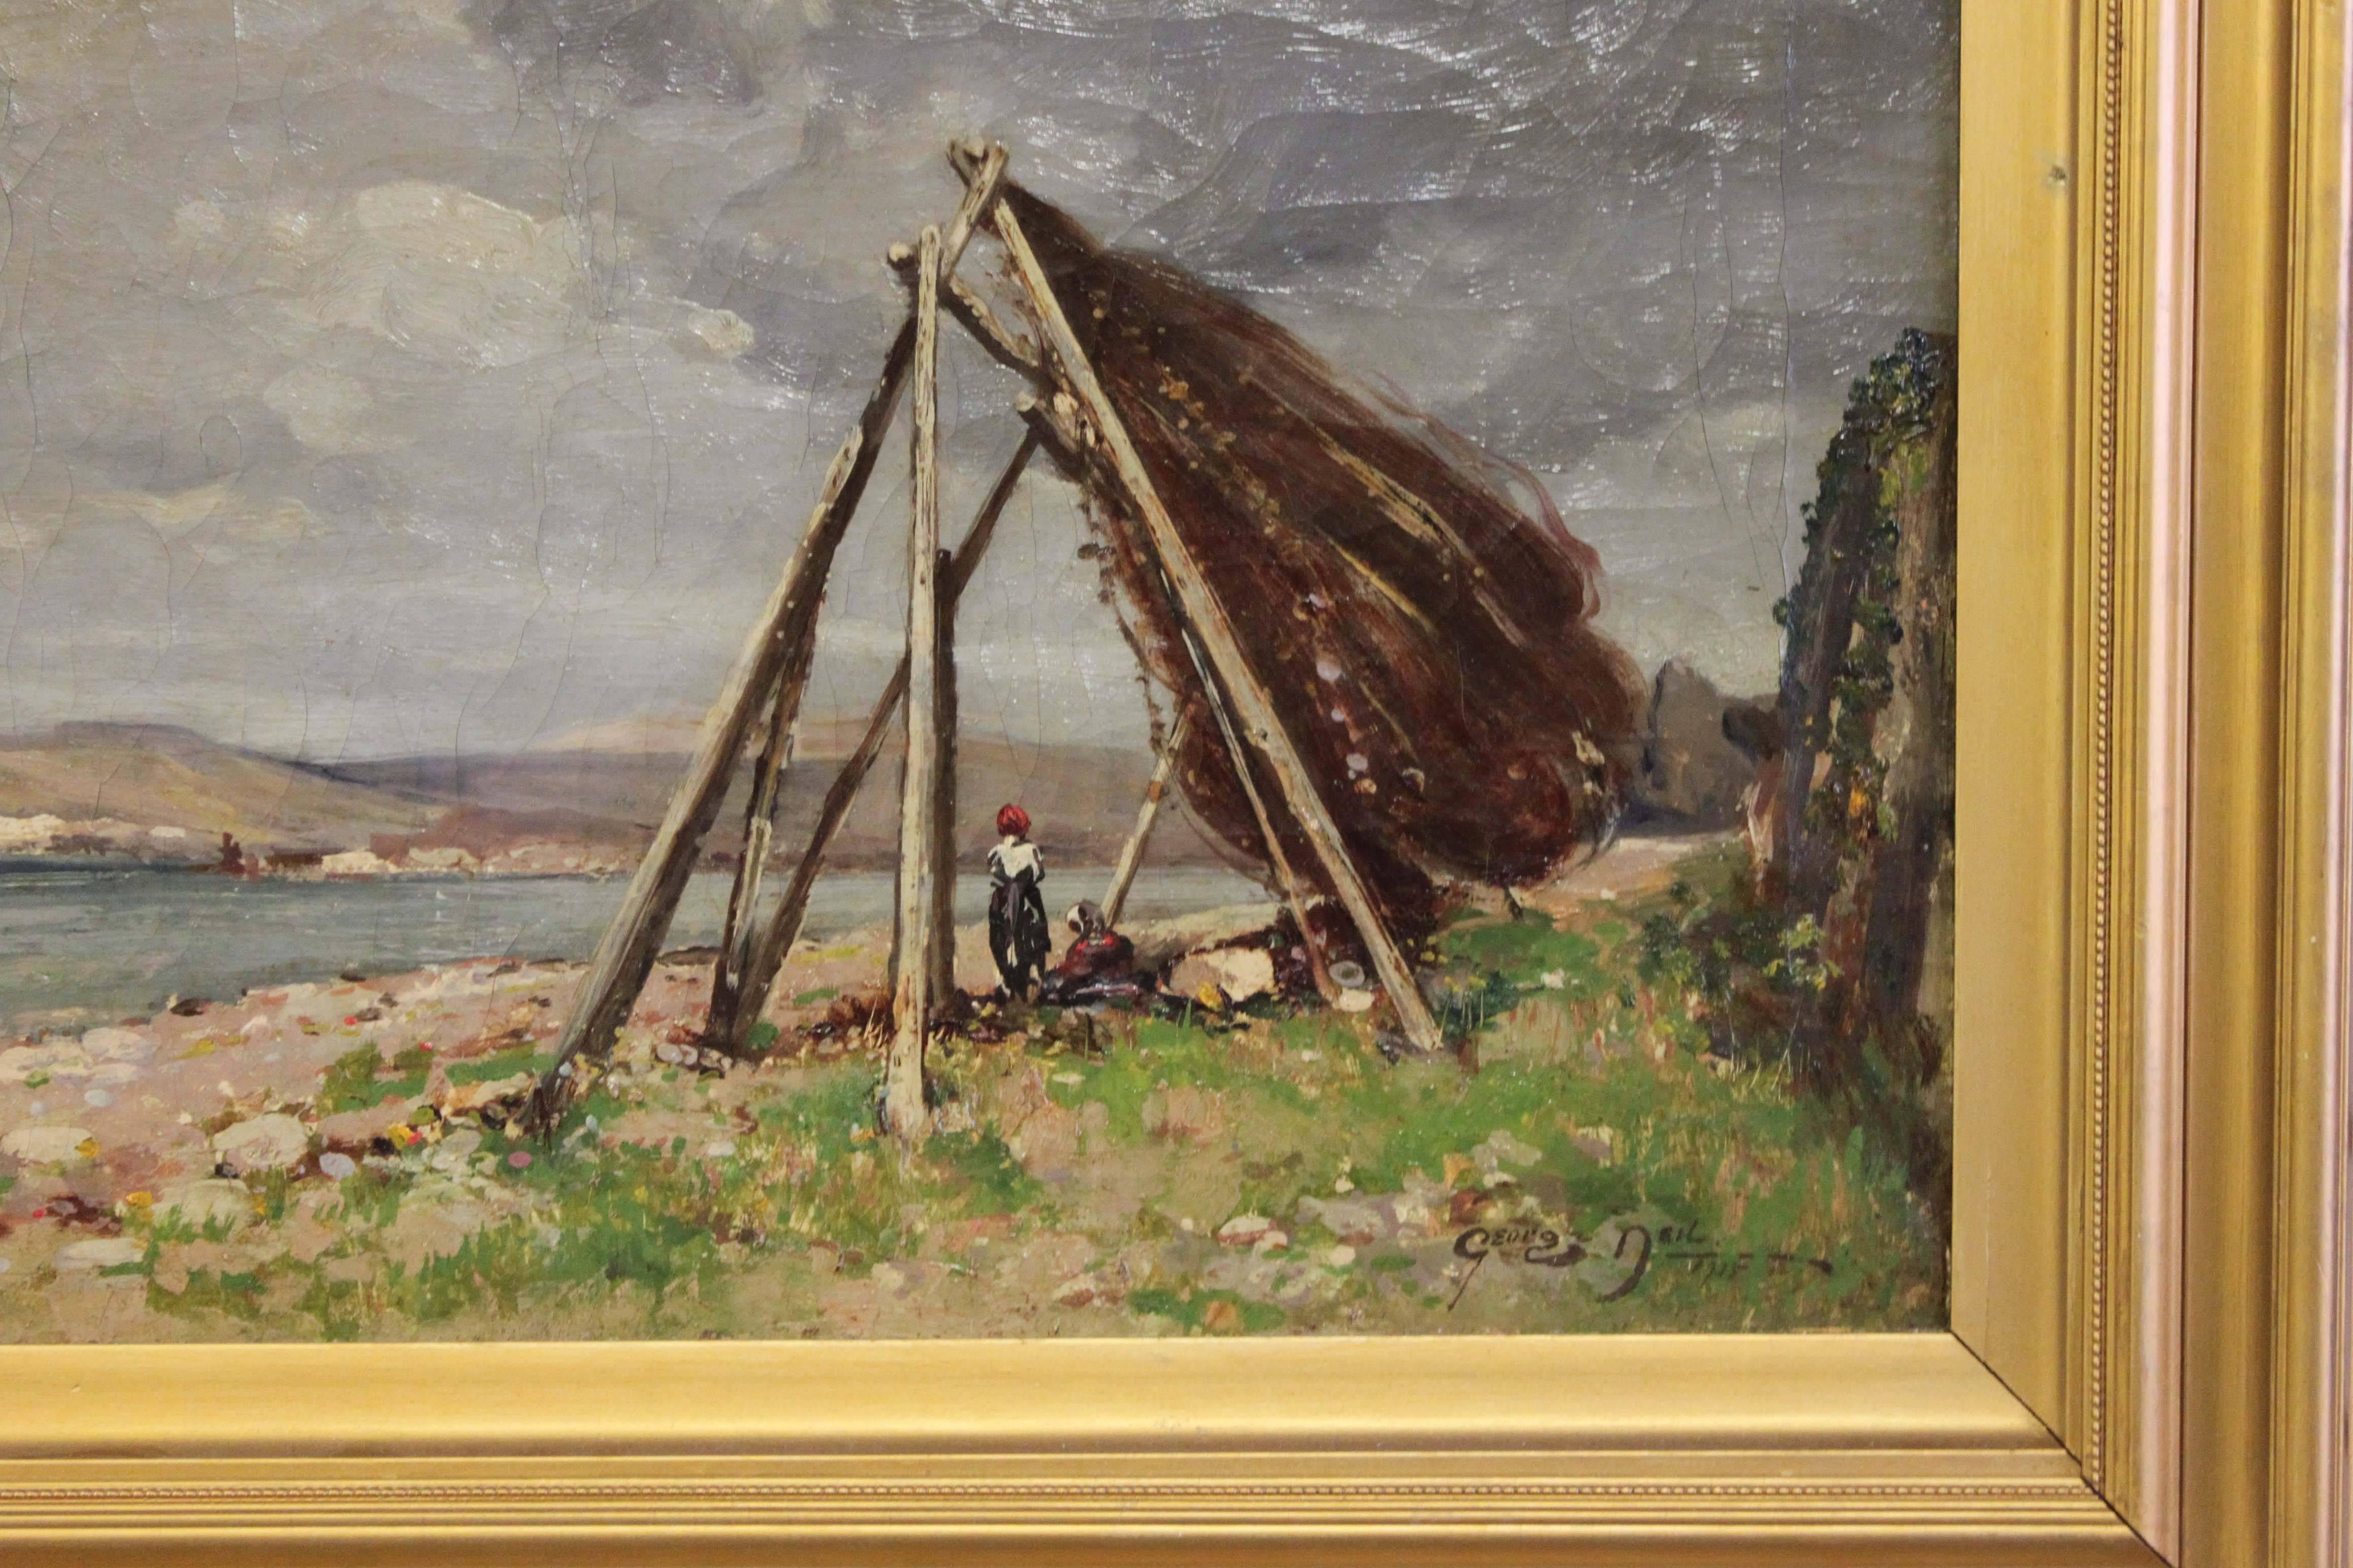 Canvas 'Fisherman Drying Nets' by George Neil For Sale